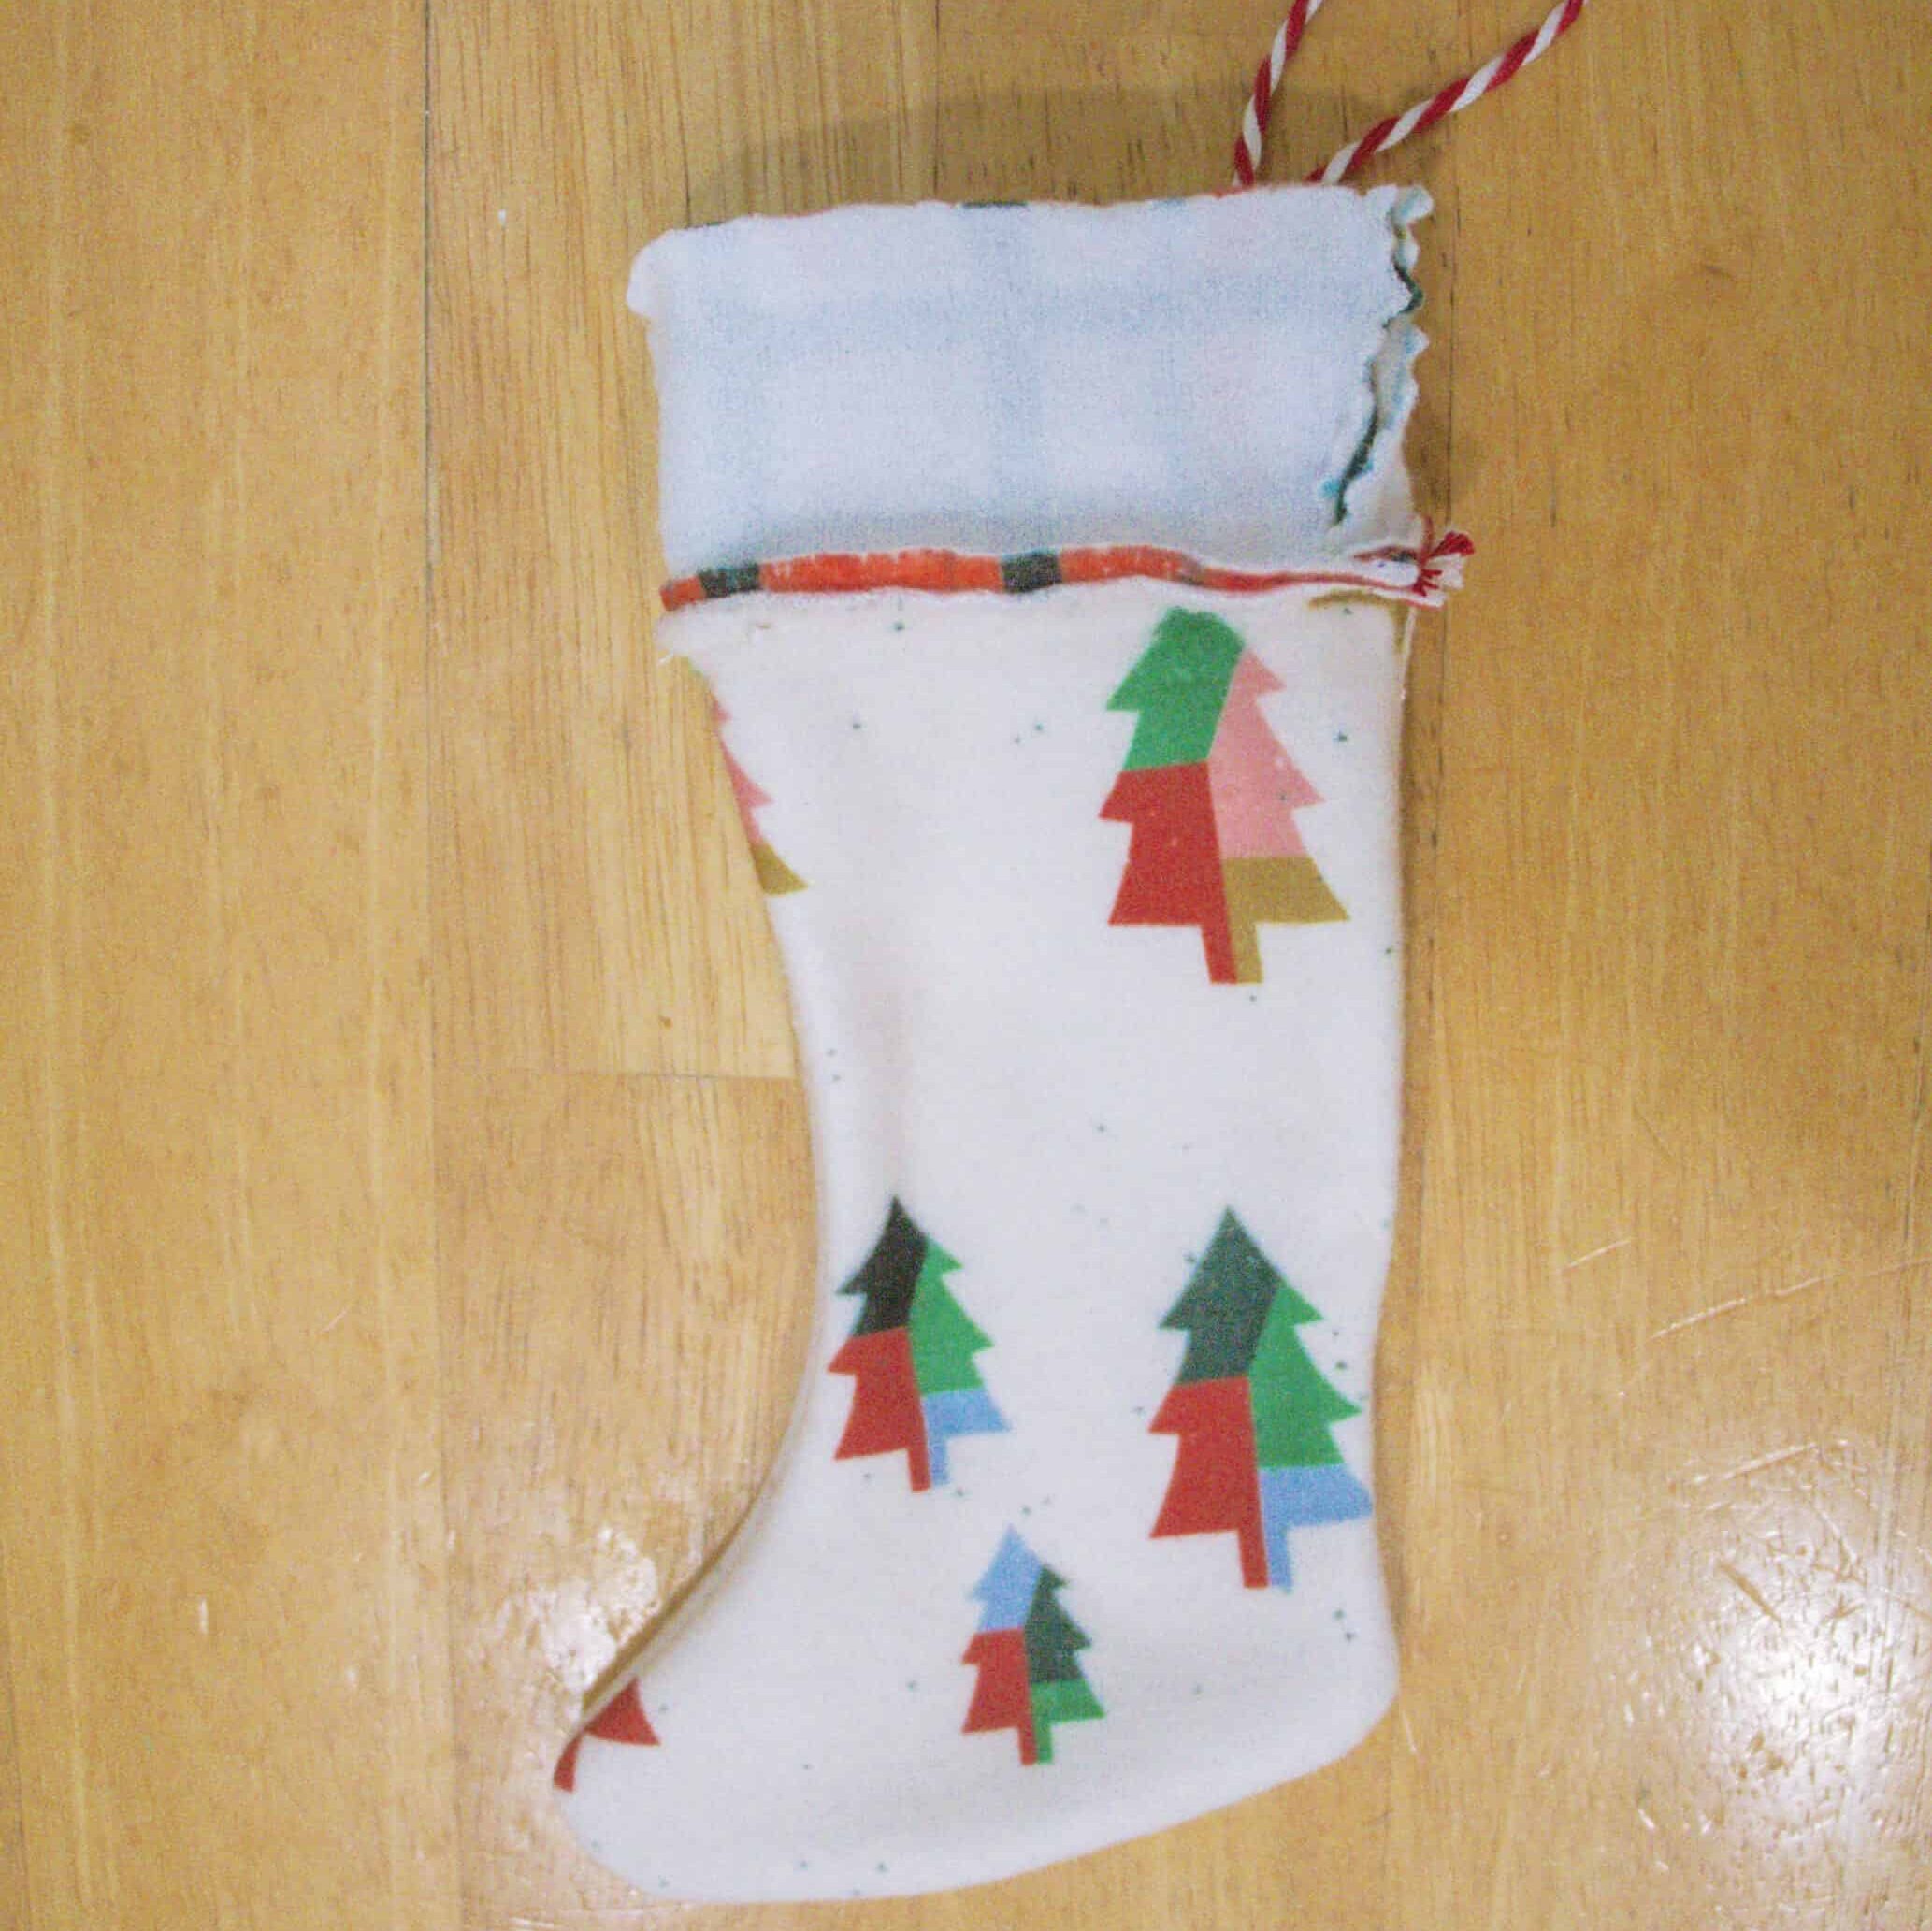 An almost completed mini stocking lays on a wooden surface. The stocking’s boot features a pattern with dark green, Kelly green, light blue and brown color-blocked trees on a cream background. The cuff has been sewn to the boot but has yet to be turned inside the boot. The white “wrong” side of the fabric is still sticking out of the boot’s top. The top of a loop of red-and-white ribbon is sticking out of the stocking’s top right.